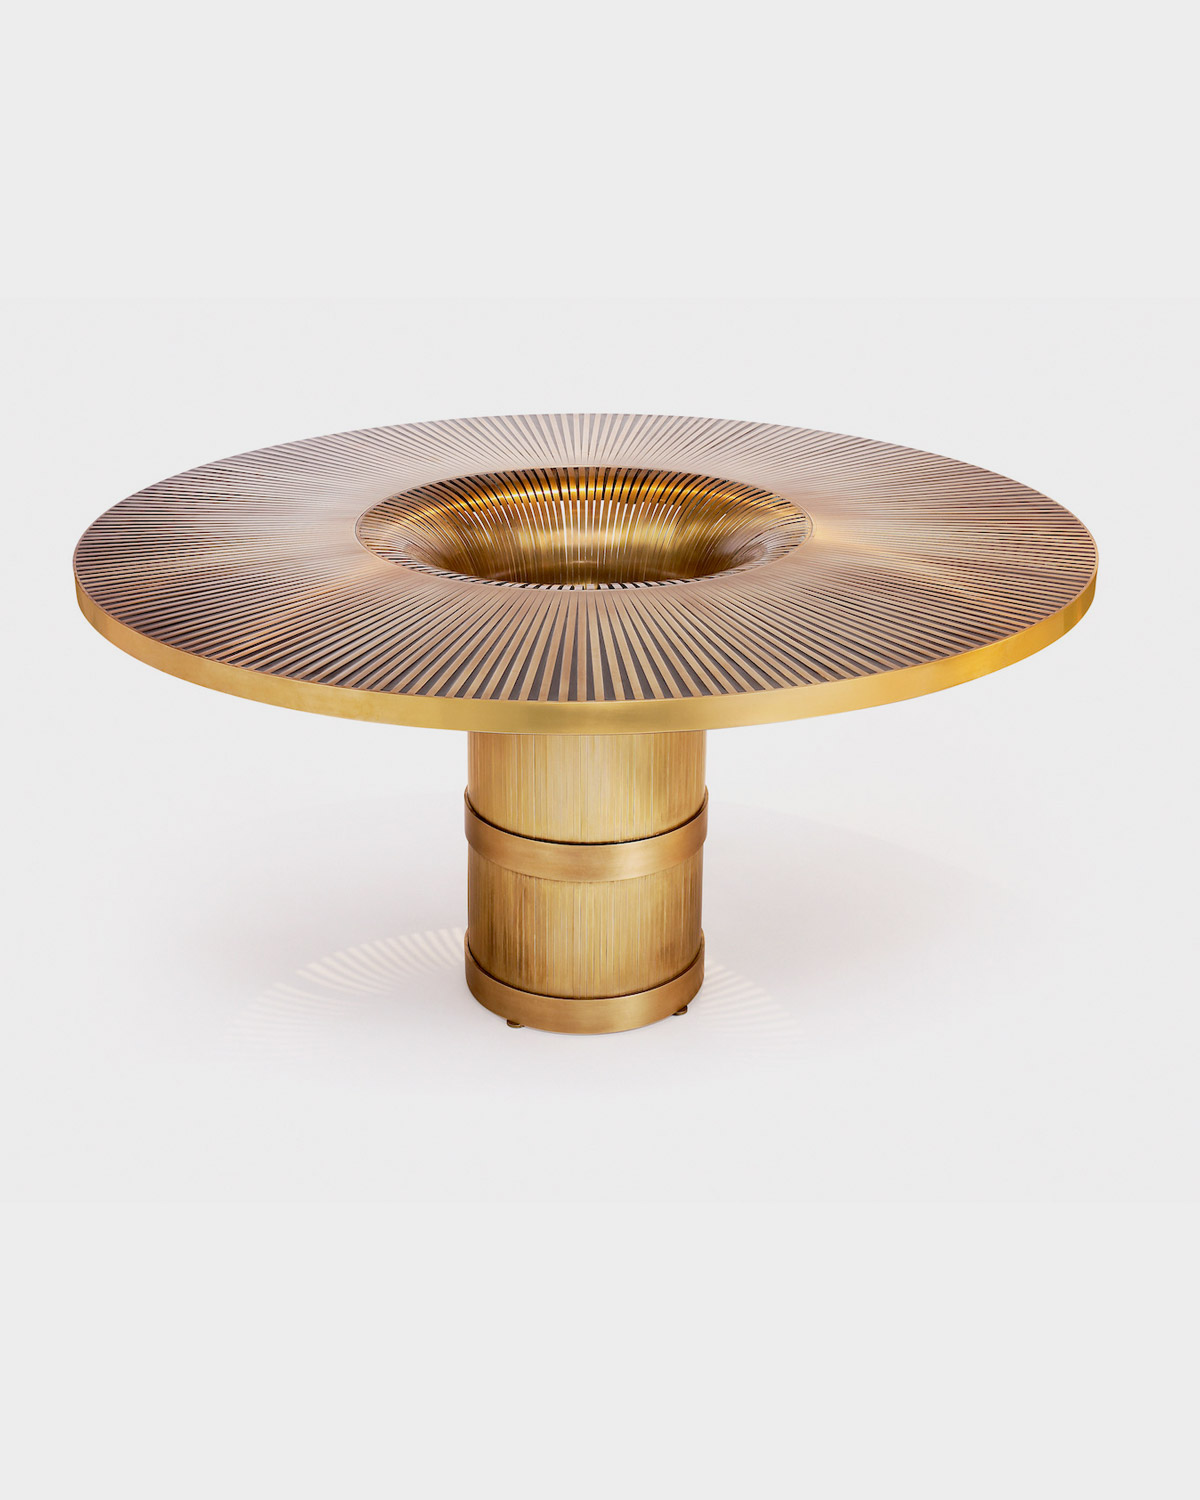 The Vortex Dining Table by Yann Dessauvages